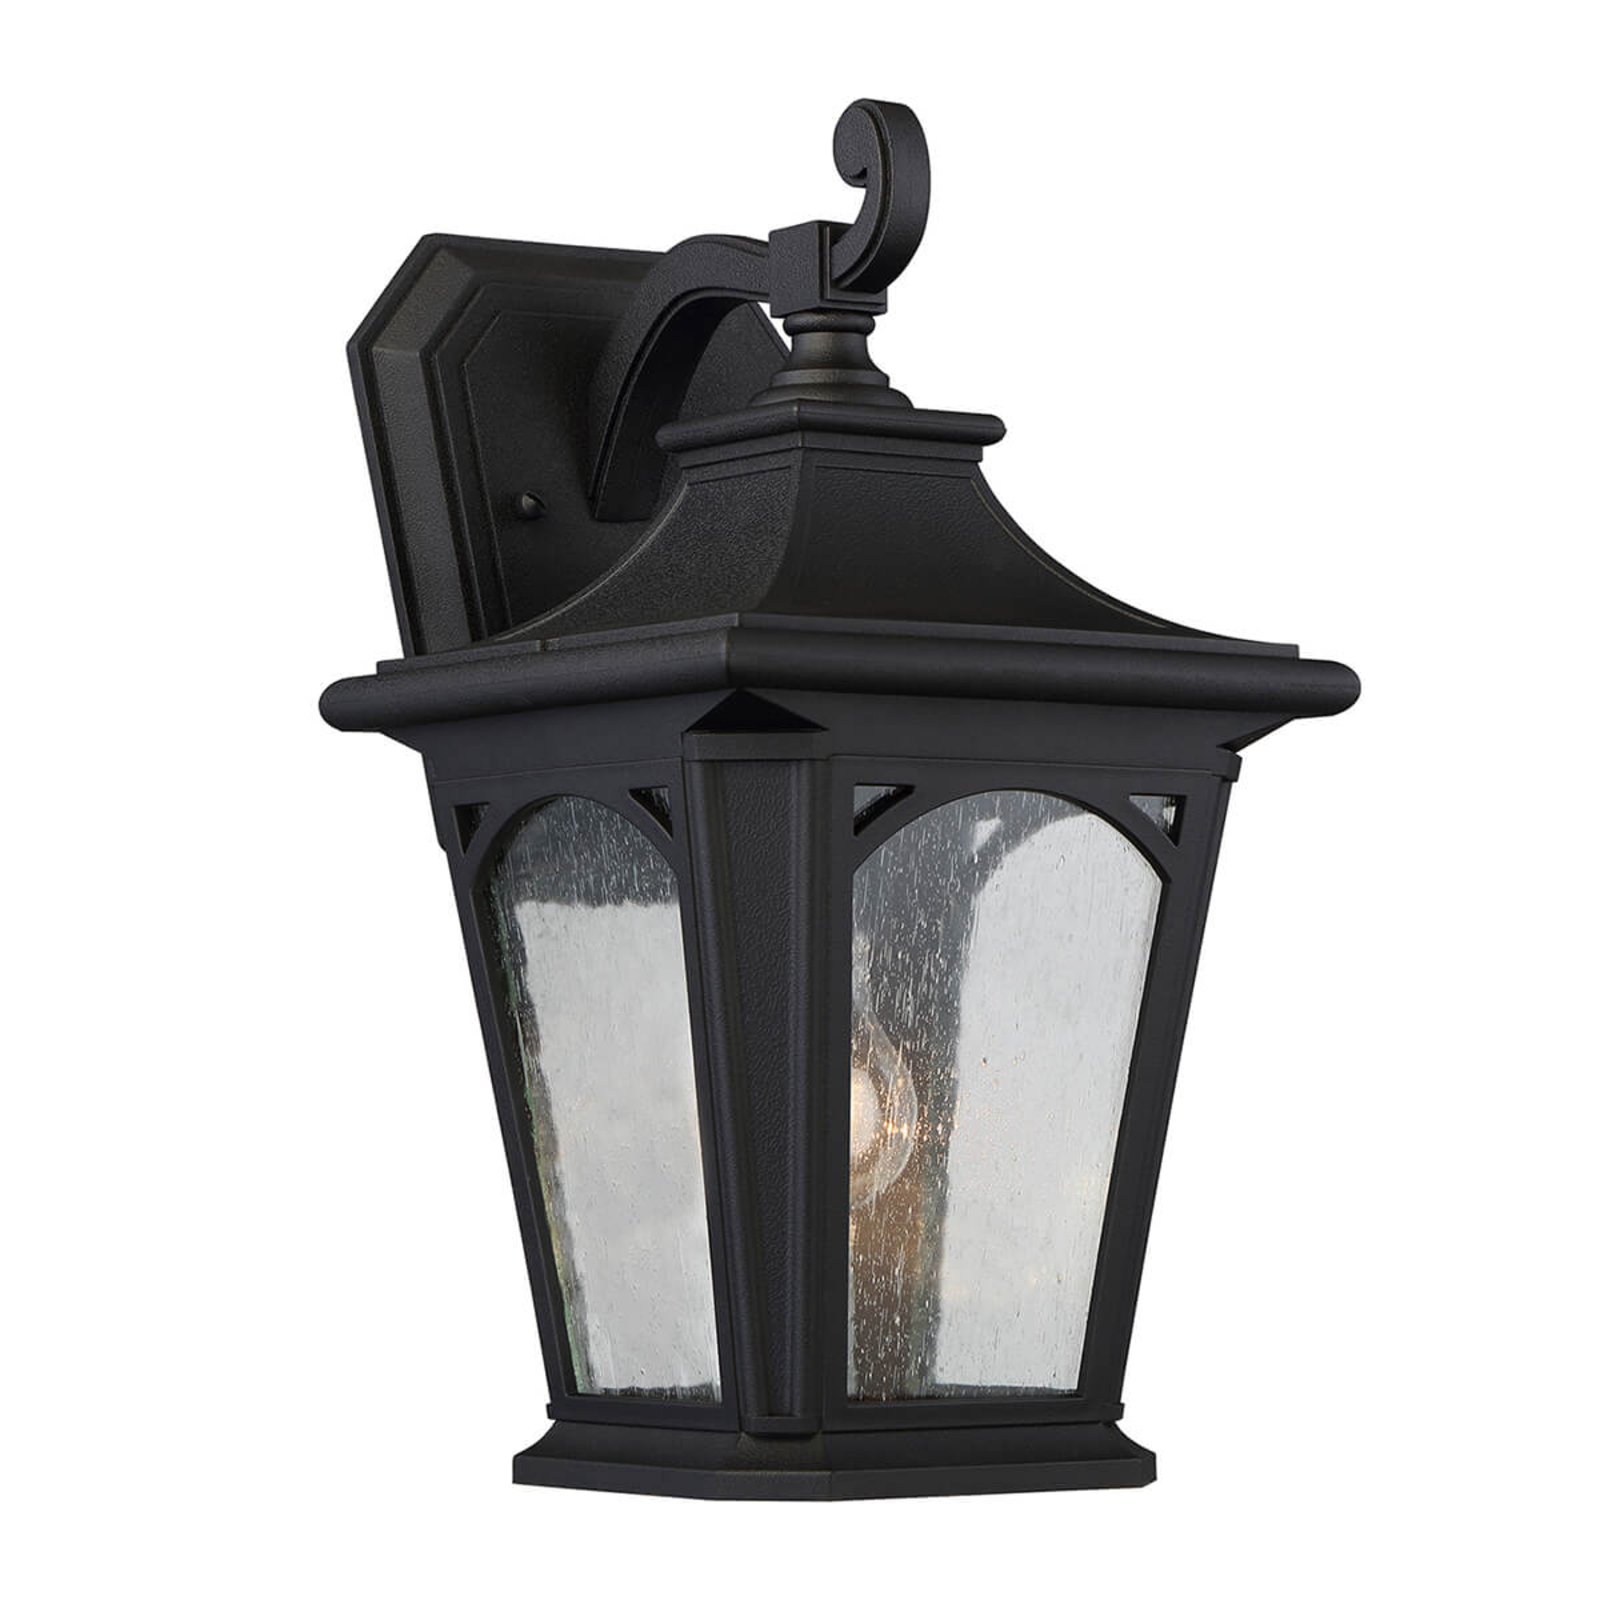 Bedford medium - wall light for the outdoors